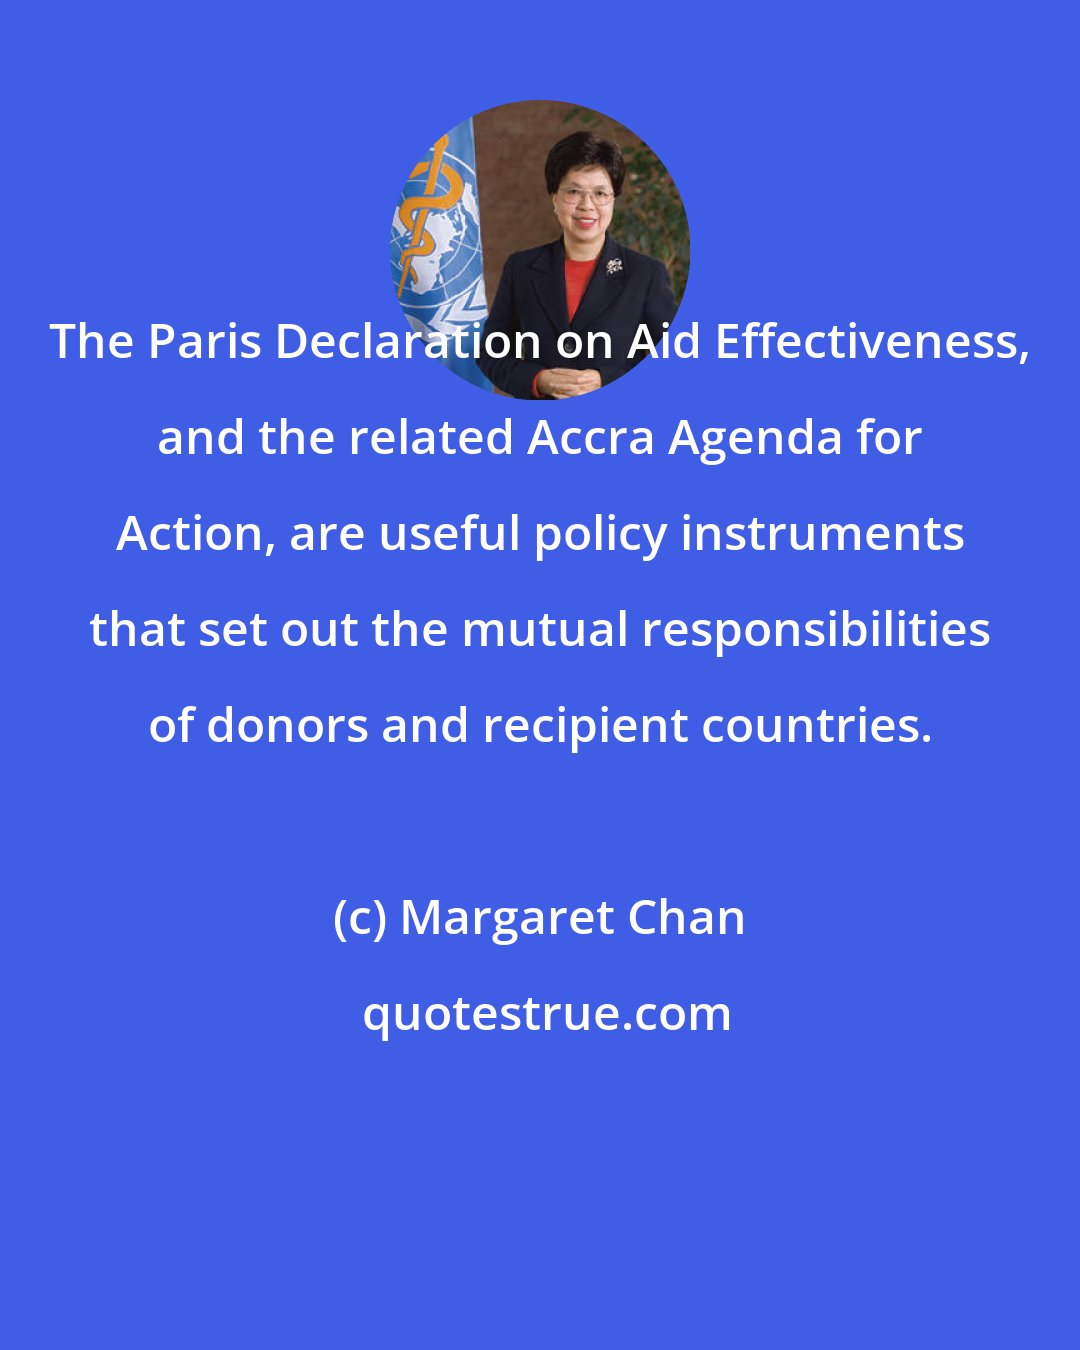 Margaret Chan: The Paris Declaration on Aid Effectiveness, and the related Accra Agenda for Action, are useful policy instruments that set out the mutual responsibilities of donors and recipient countries.